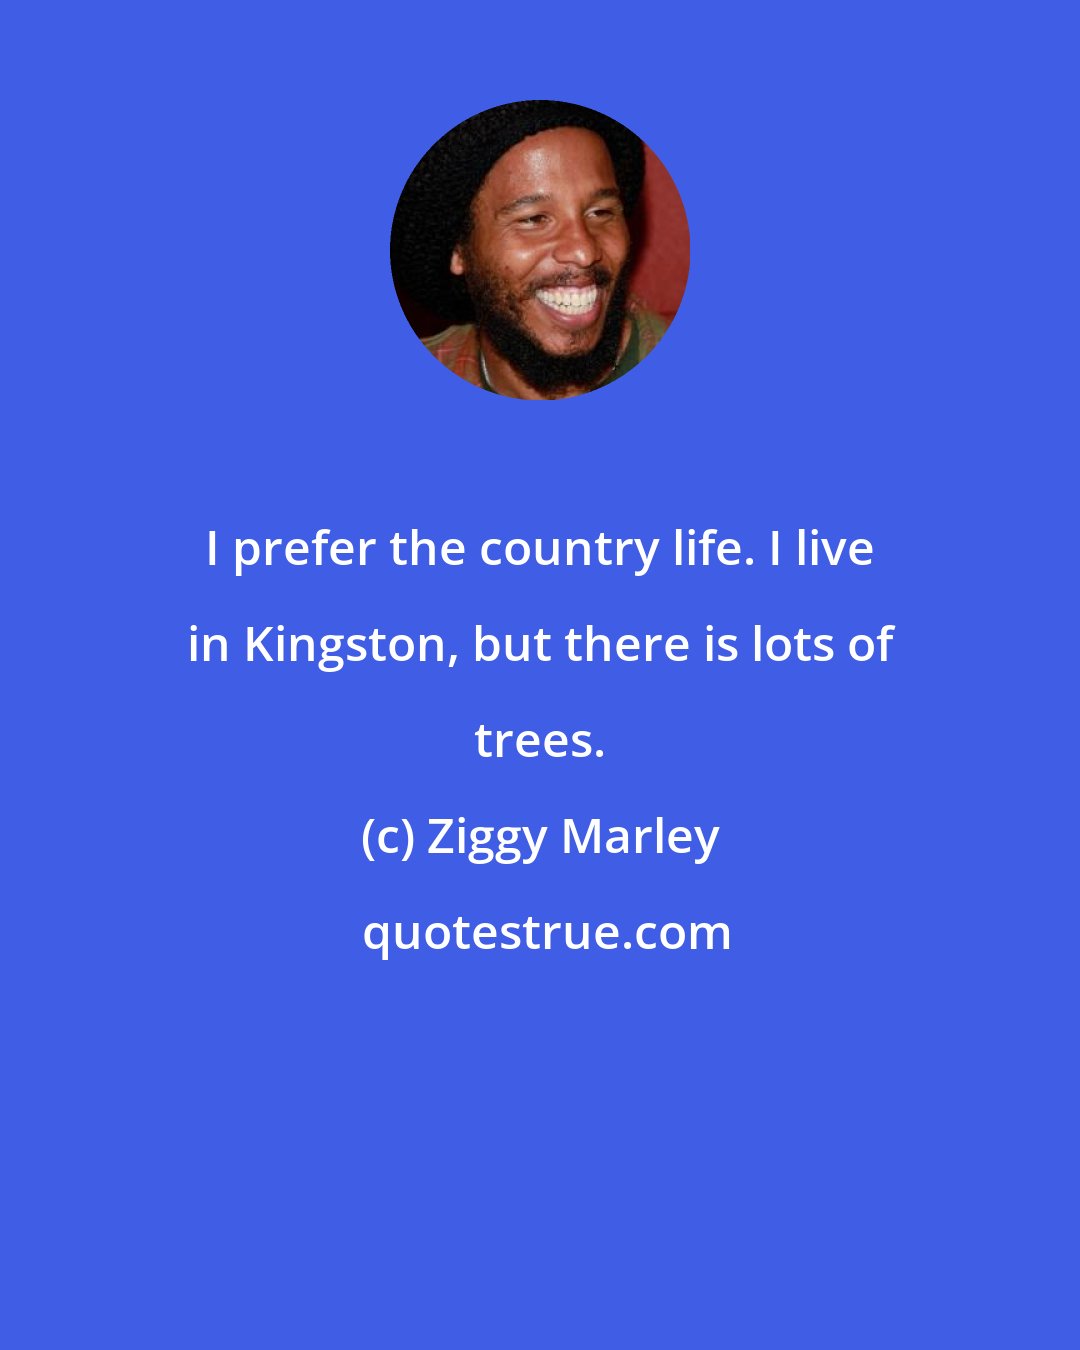 Ziggy Marley: I prefer the country life. I live in Kingston, but there is lots of trees.